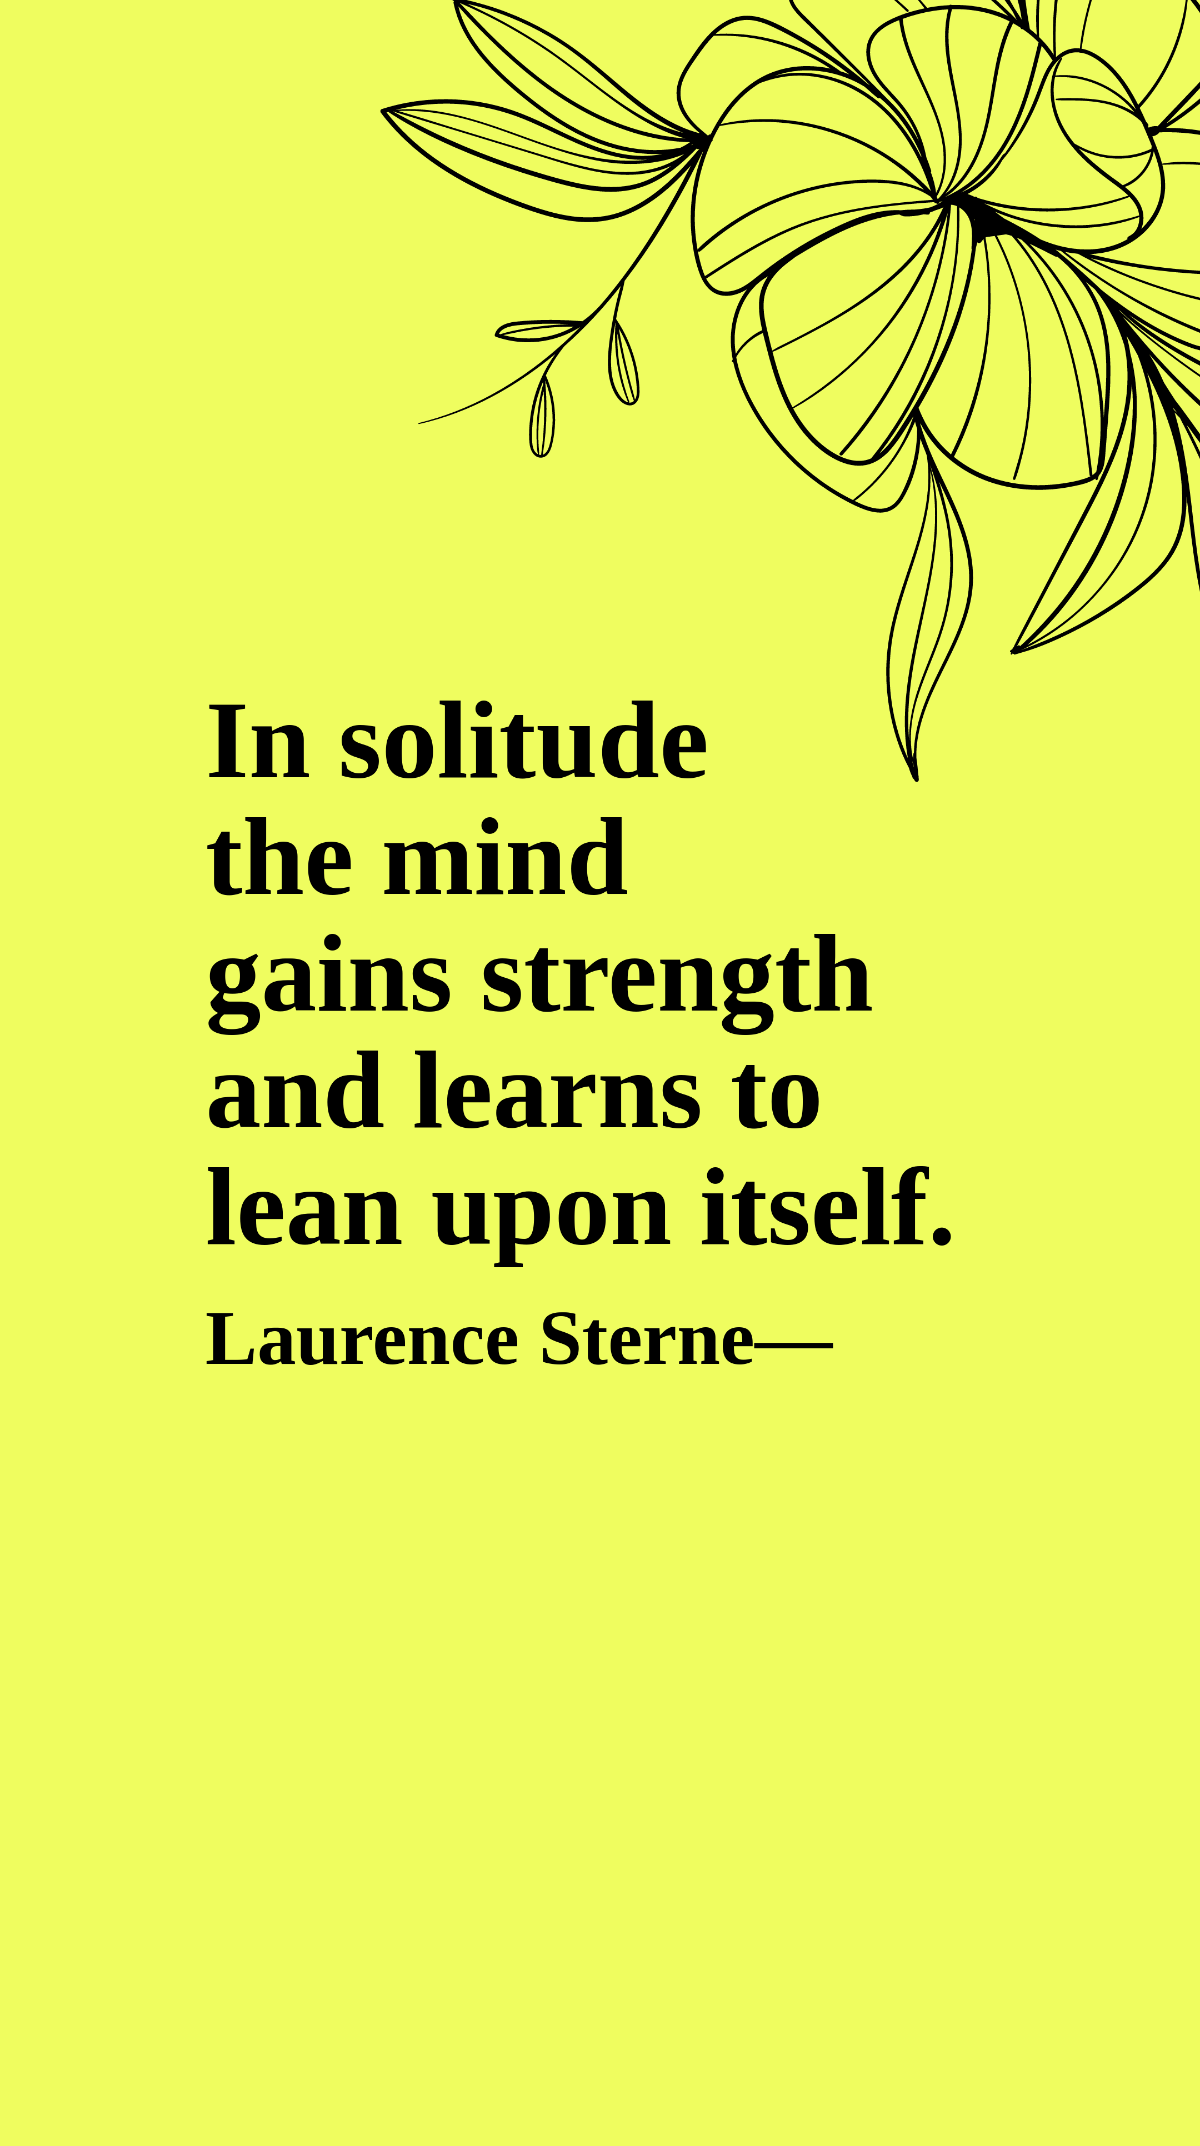 Laurence Sterne - In solitude the mind gains strength and learns to lean upon itself. Template